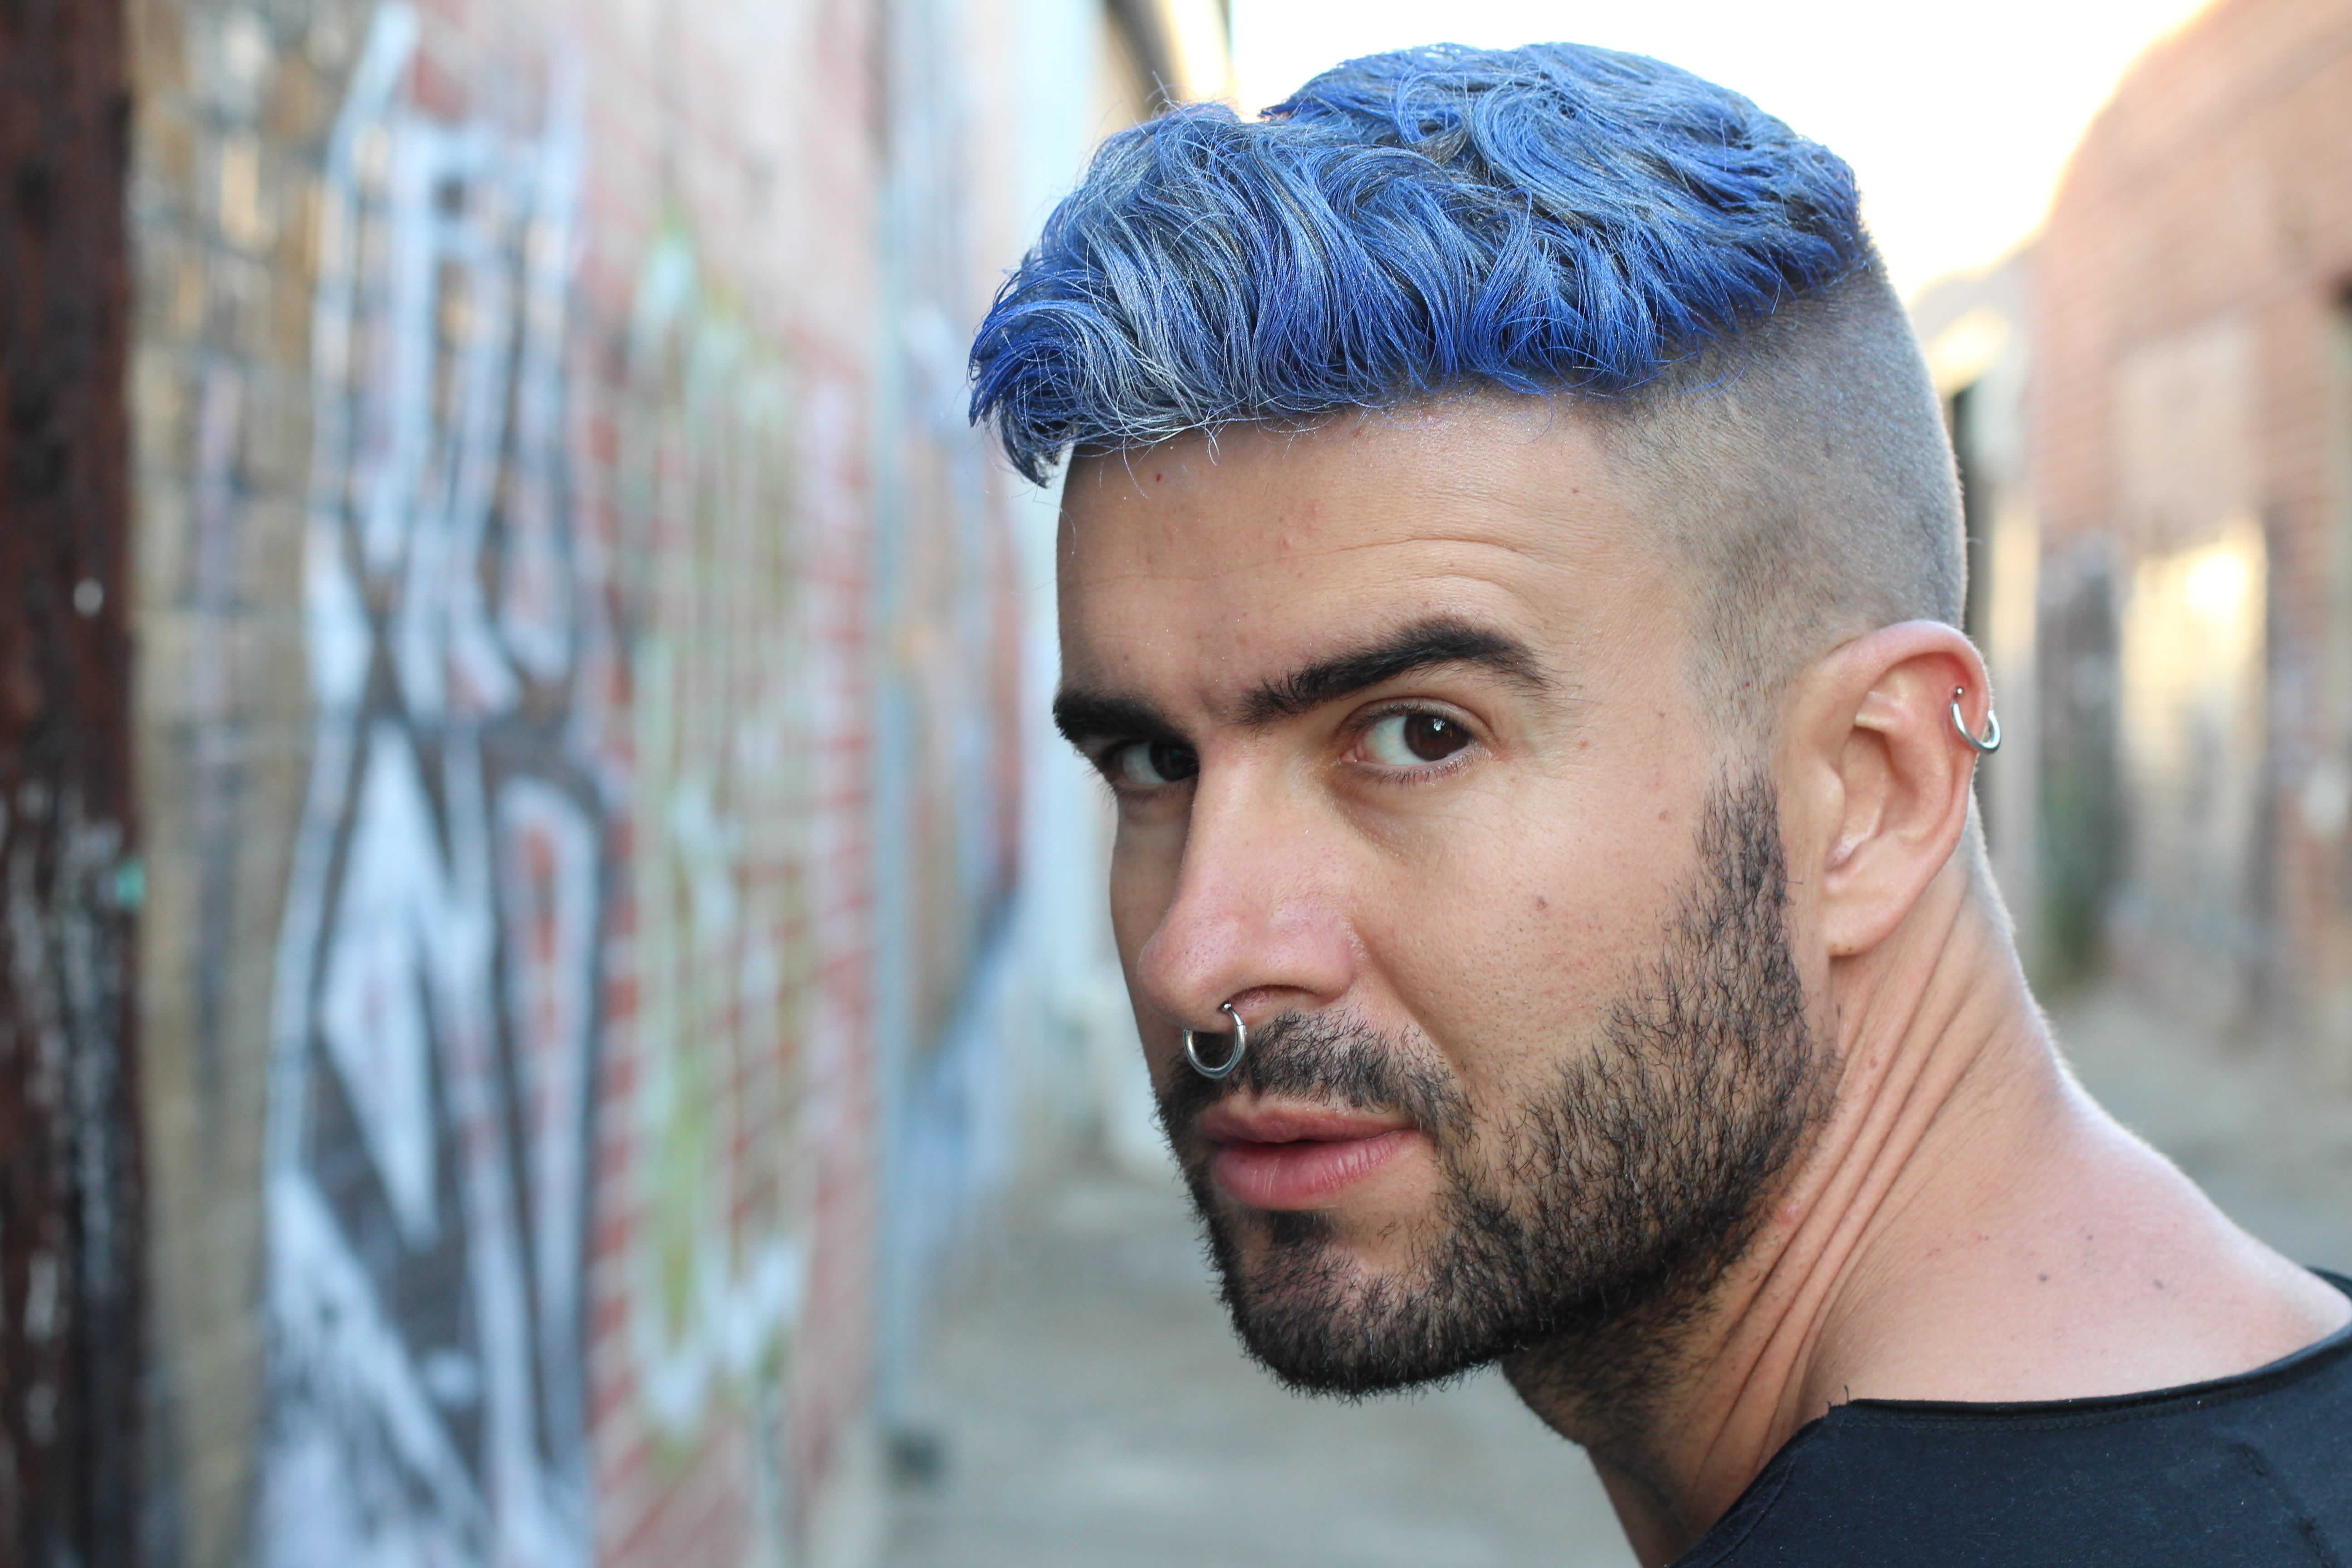 How to Get Blue Highlights in Your Hair - wide 7